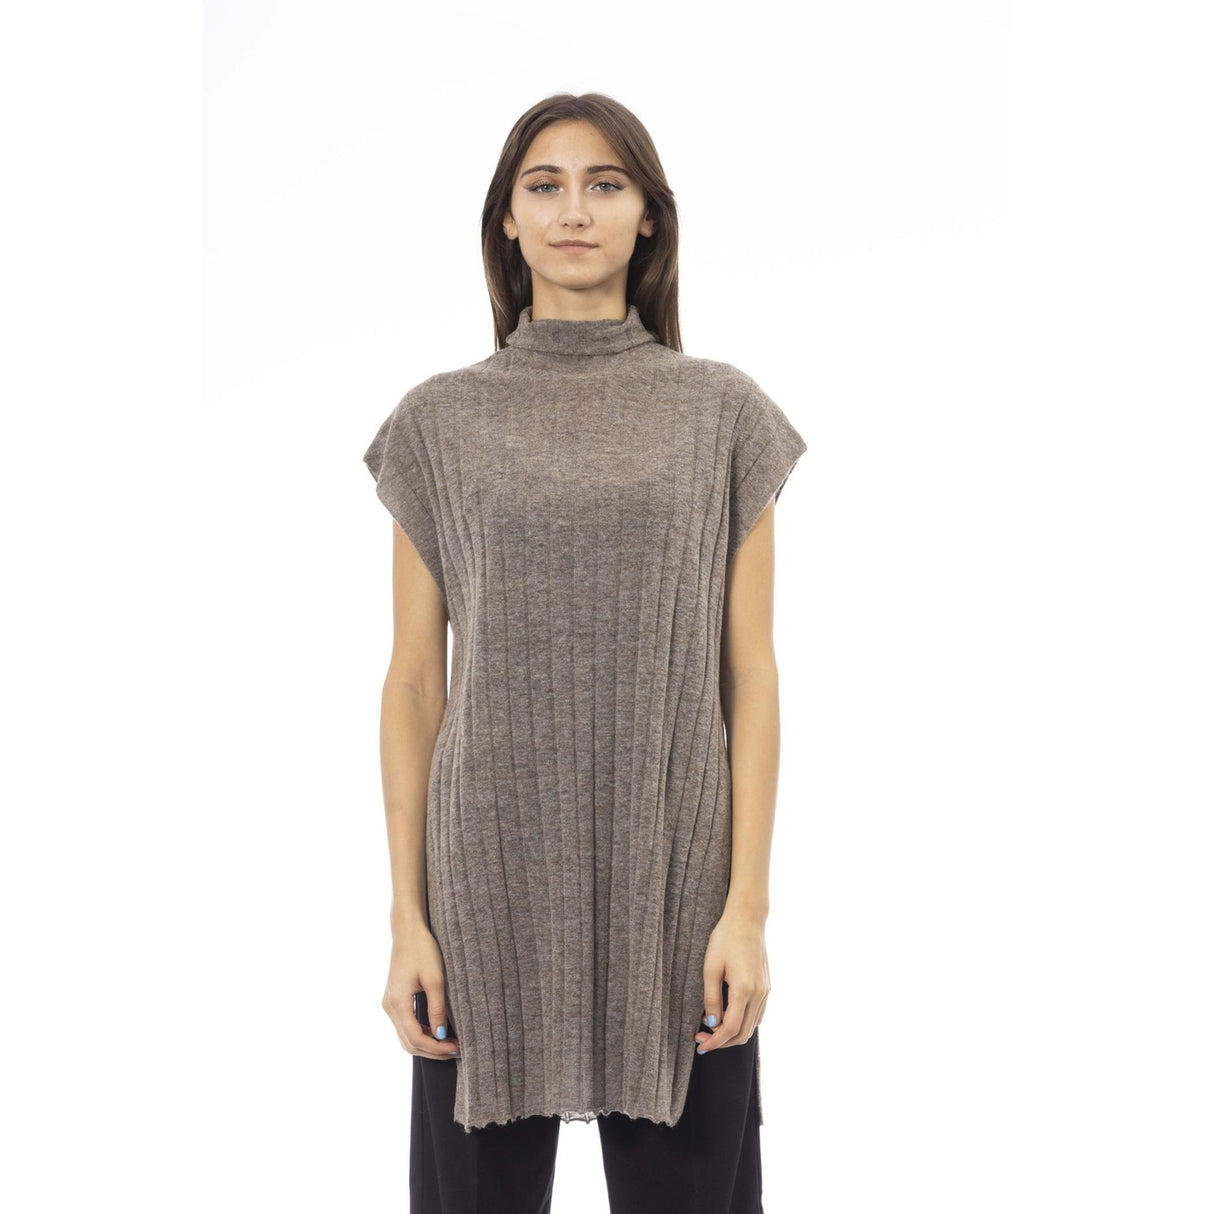 Women's sweater Short-sleeve sweater Turtleneck sweater Italian-made sweater Warm sweater (depending on the wool percentage) Comfortable sweater Breathable sweater Layering sweater Statement sweater Transitional sweater